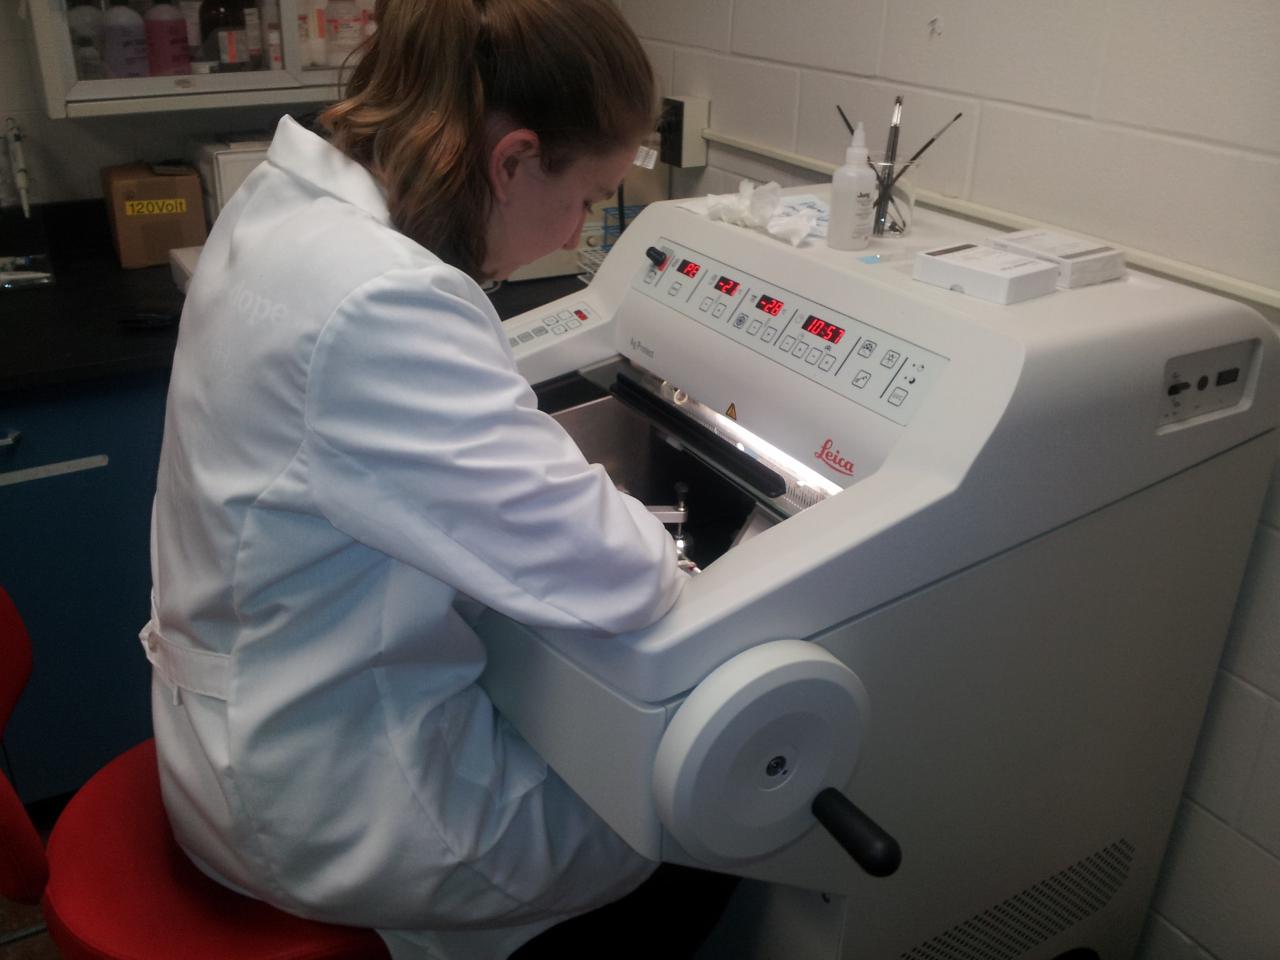 Student using a machine for an experiment